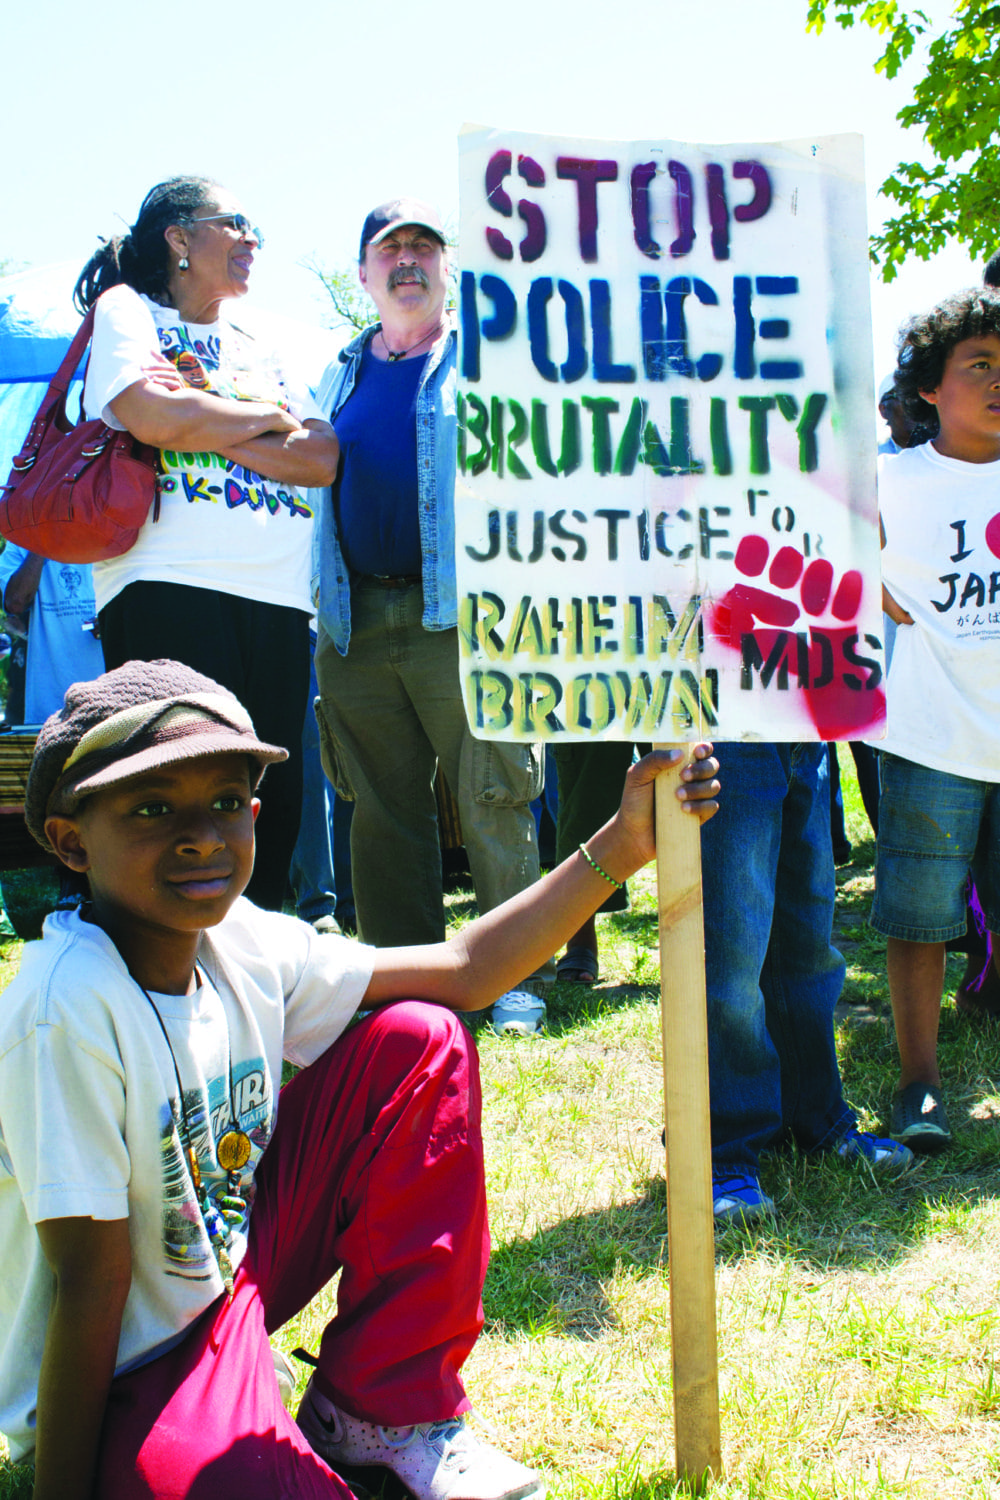 Geronimo-Day-Bobby-Hutton-Park-boy-with-Raheim-Brown-sign-071711-by-Malaika, The long arc of resistance to police in Oakland schools, Local News & Views 